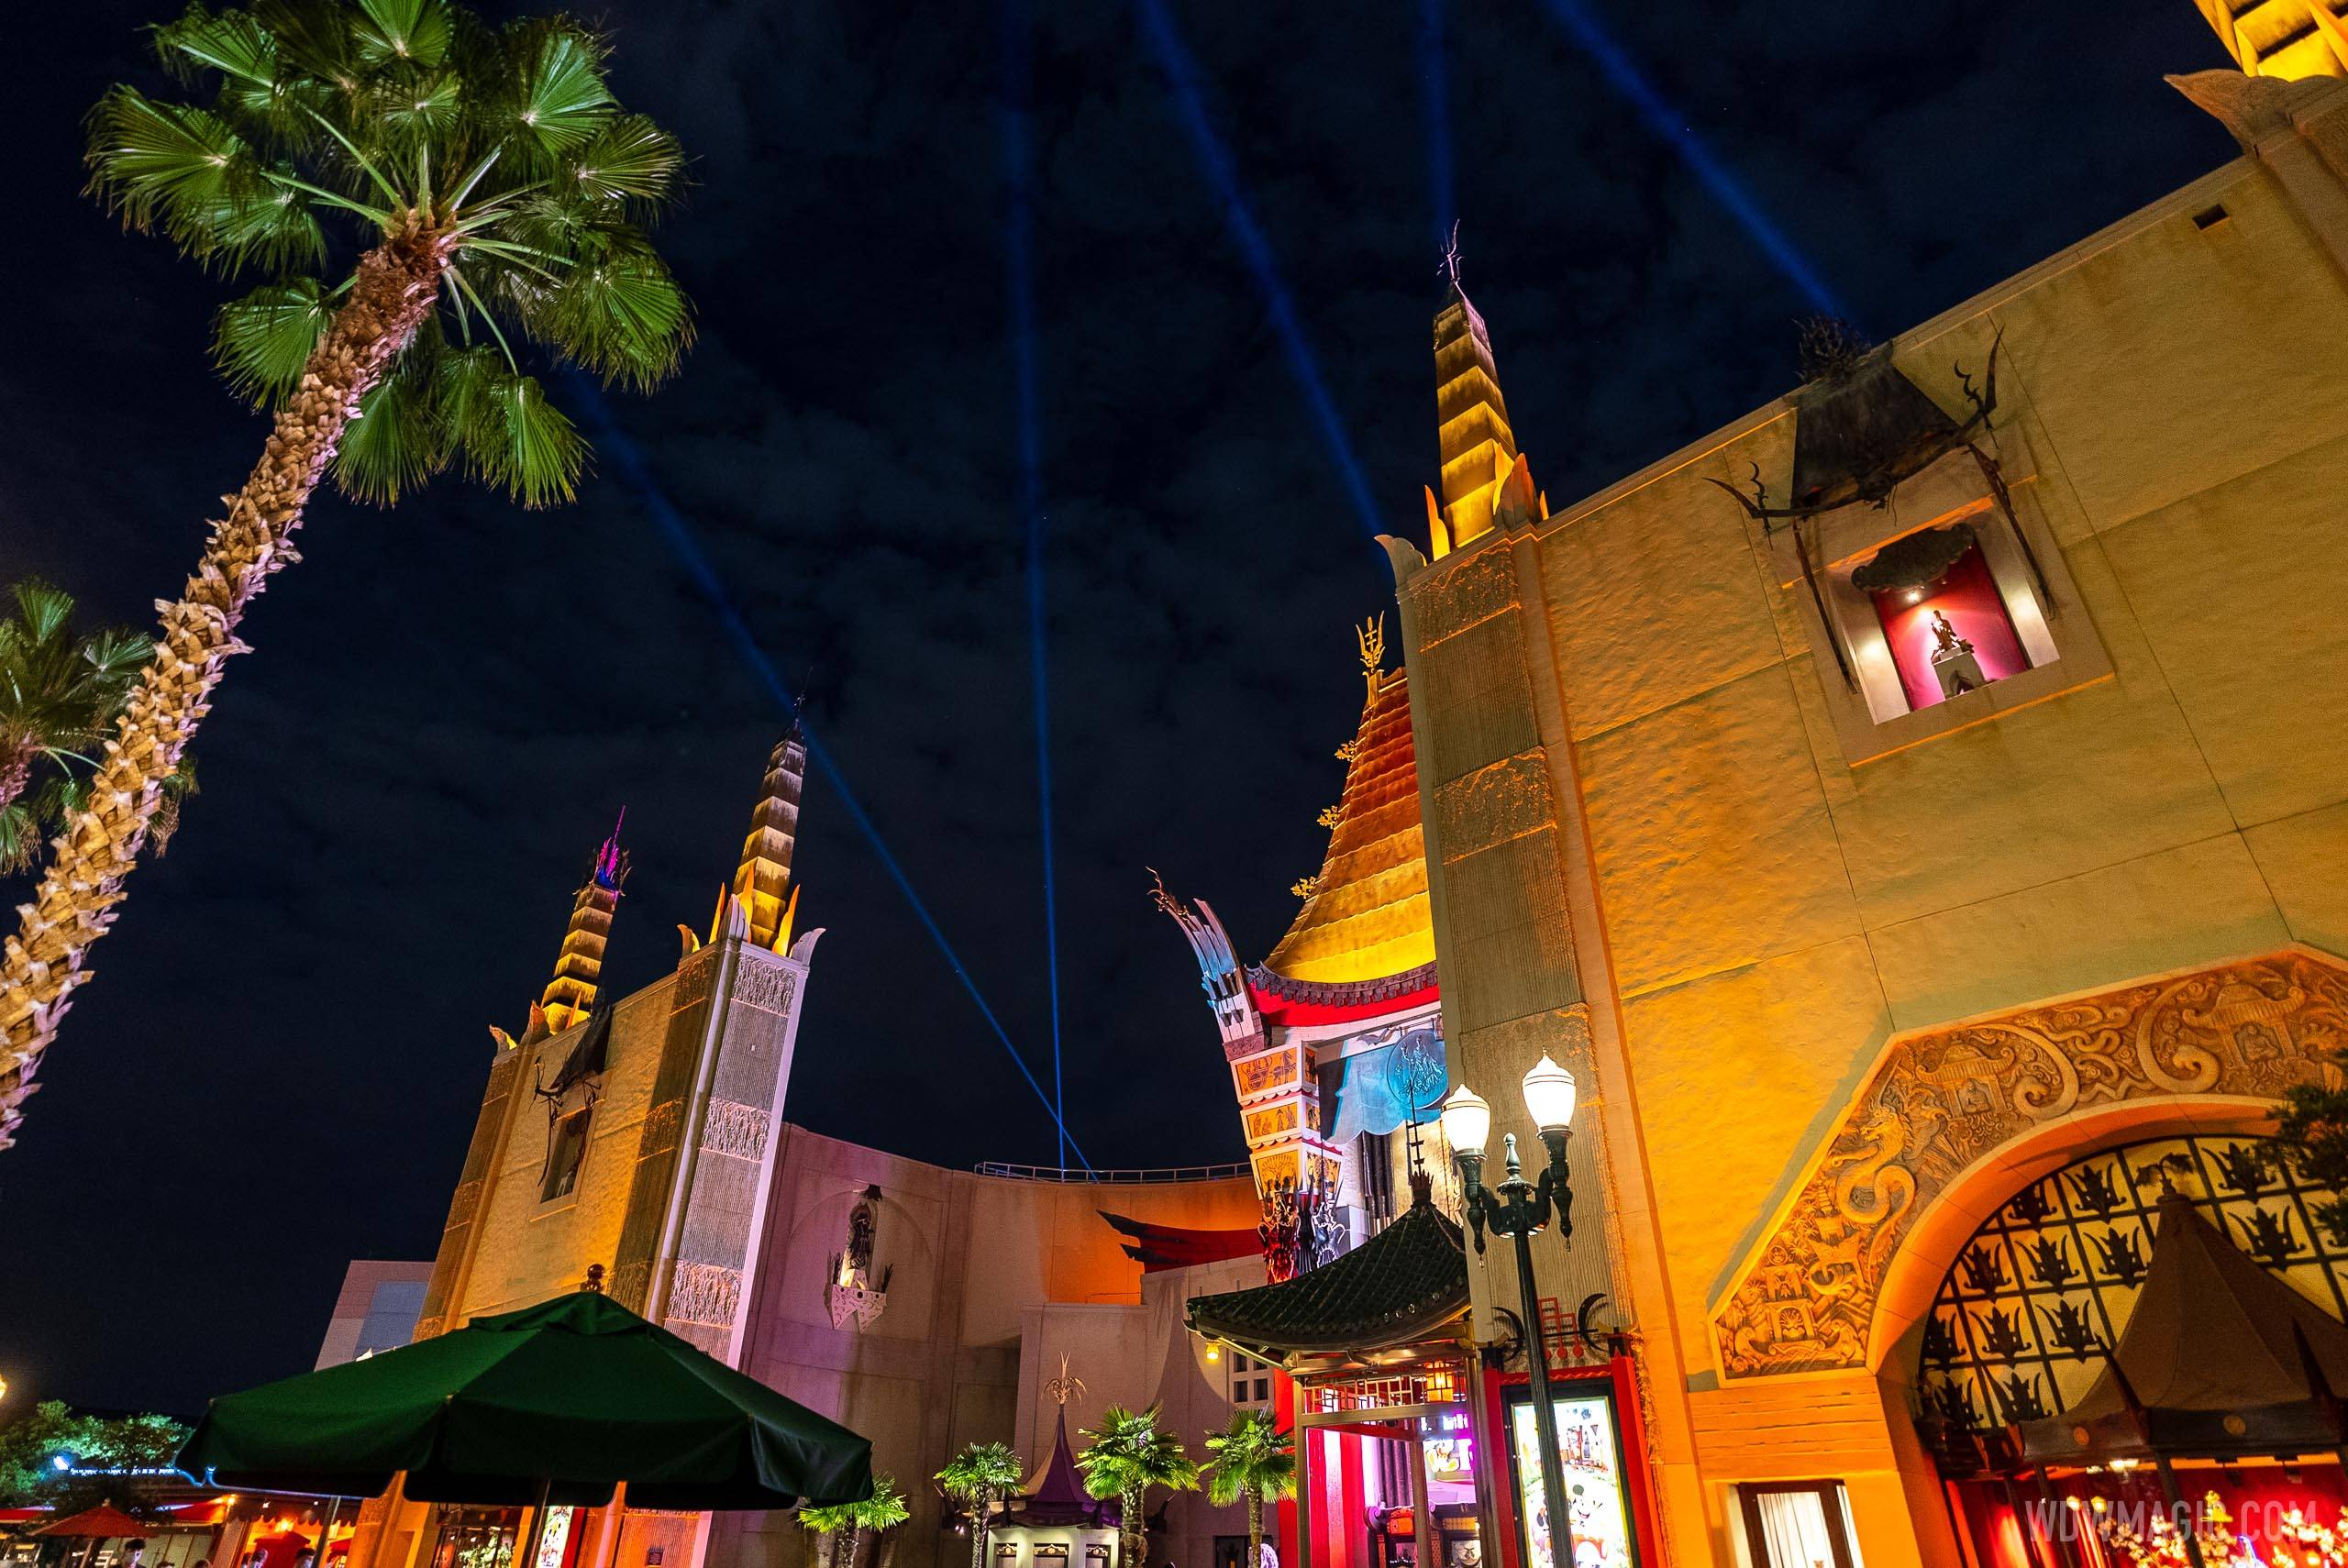 A few evening hours have been added at Disney's Hollywood Studios